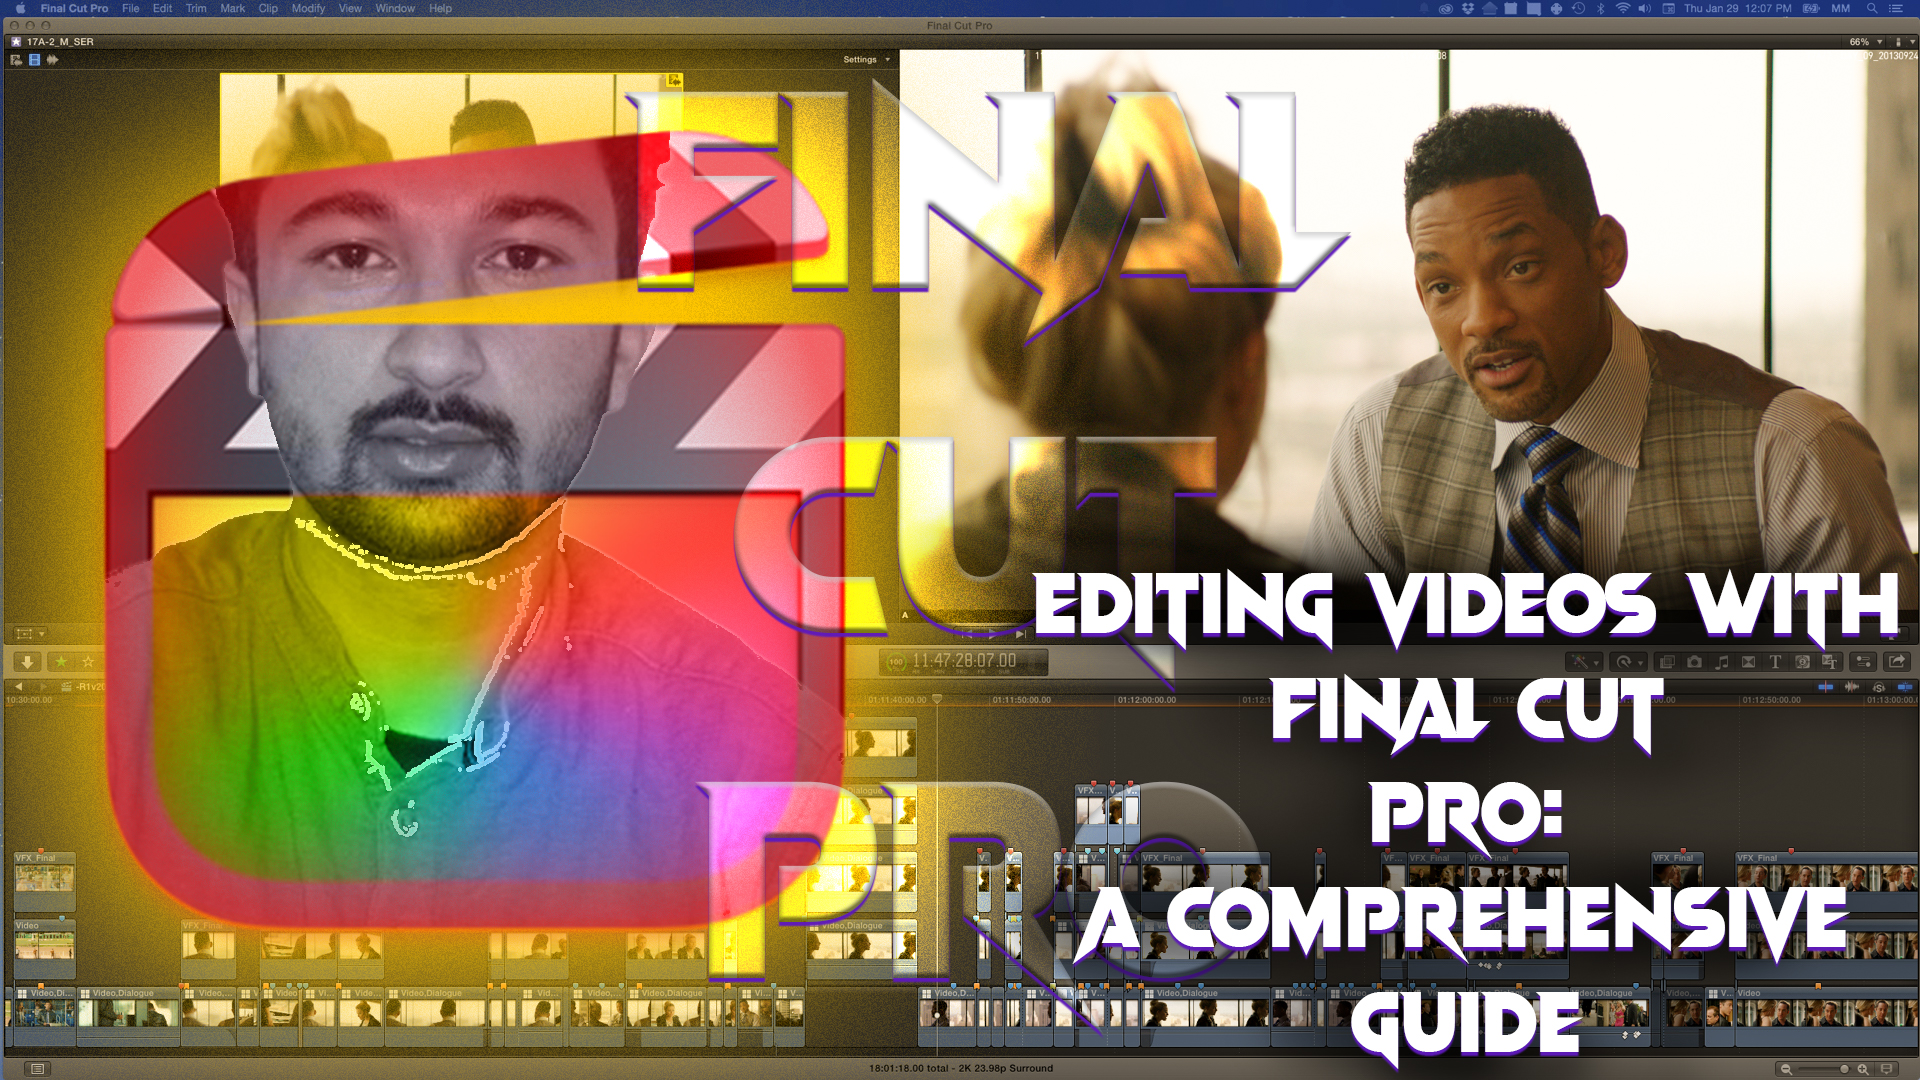 Editing Videos with Final Cut Pro: A Comprehensive Guide